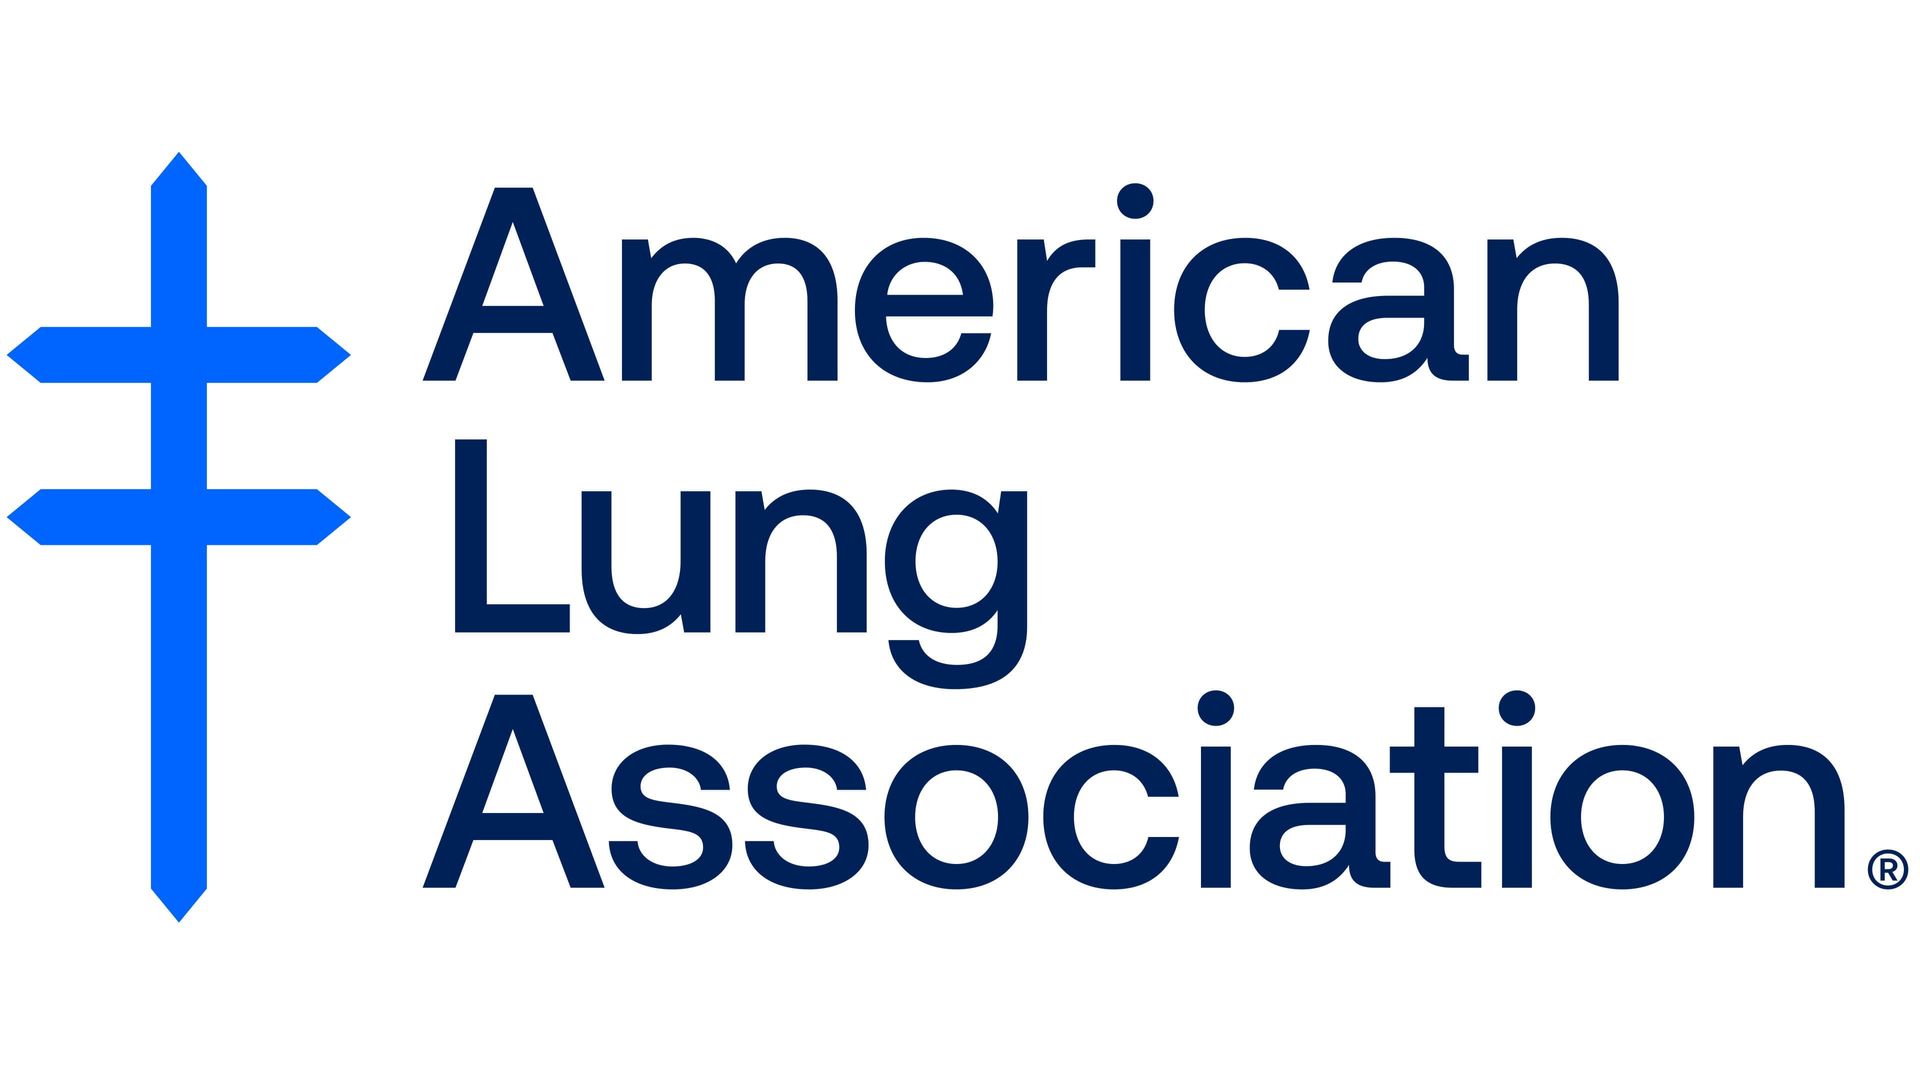 American Lung Association annual rankings show New Jersey suffers from poor air quality.